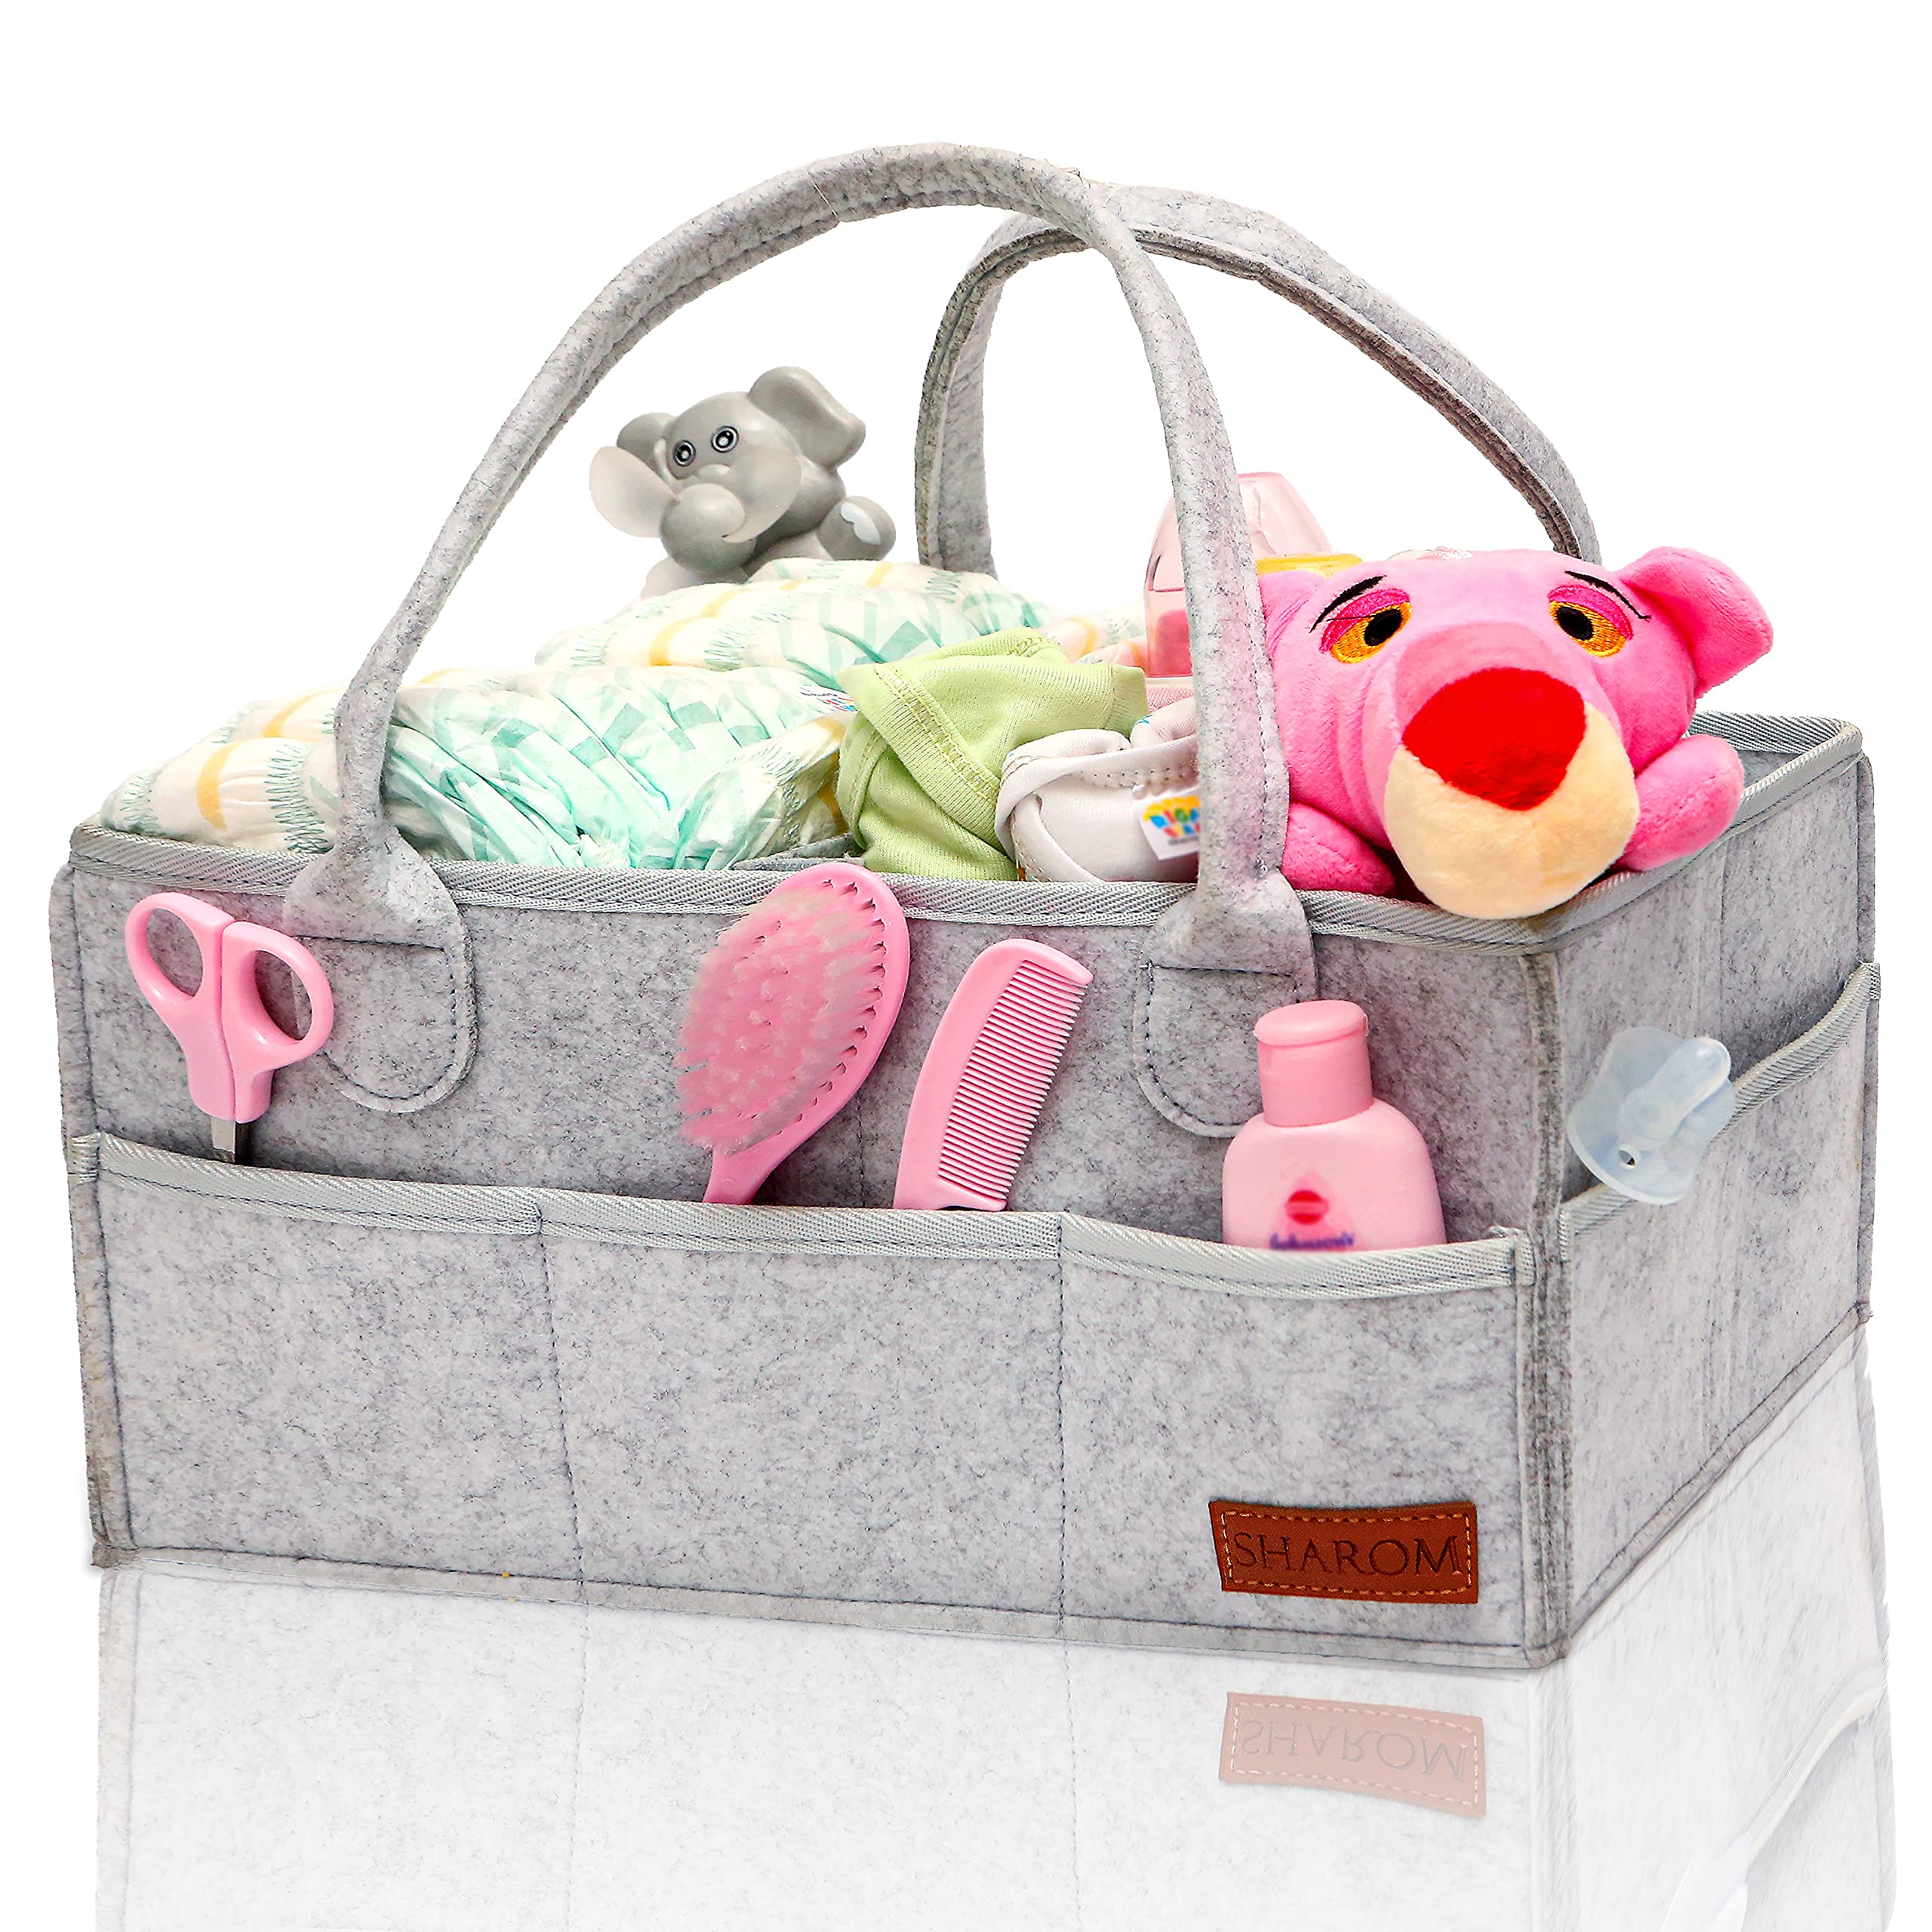 SHAROM Nappy Caddy Organiser - Sturdy 3mm Thick Portable Baby Diaper Bag for Storage - Easy to Carry Nursery Basket for Wipes and Newborn Essentials, Grey Felt